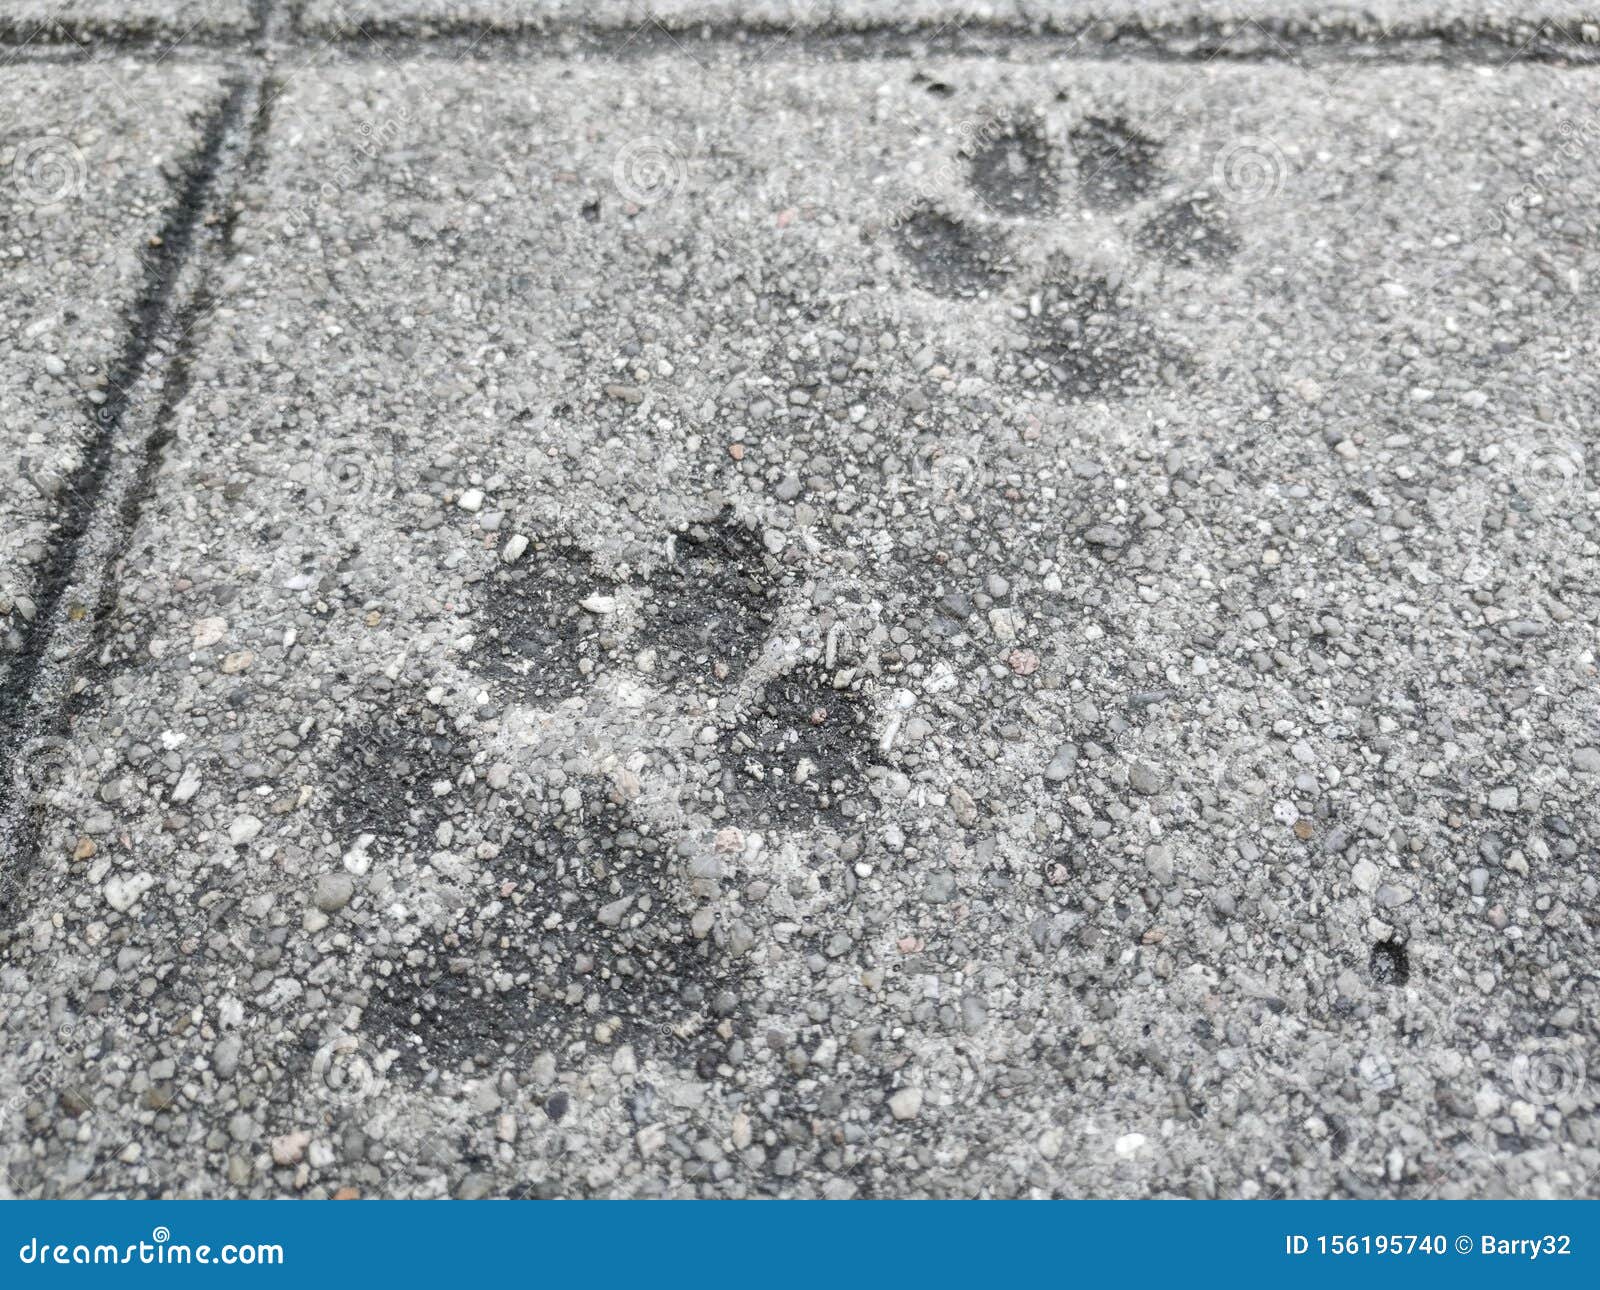 Dog Paw Prints or Footprints, Left by a Dog in the Concrete Pavement